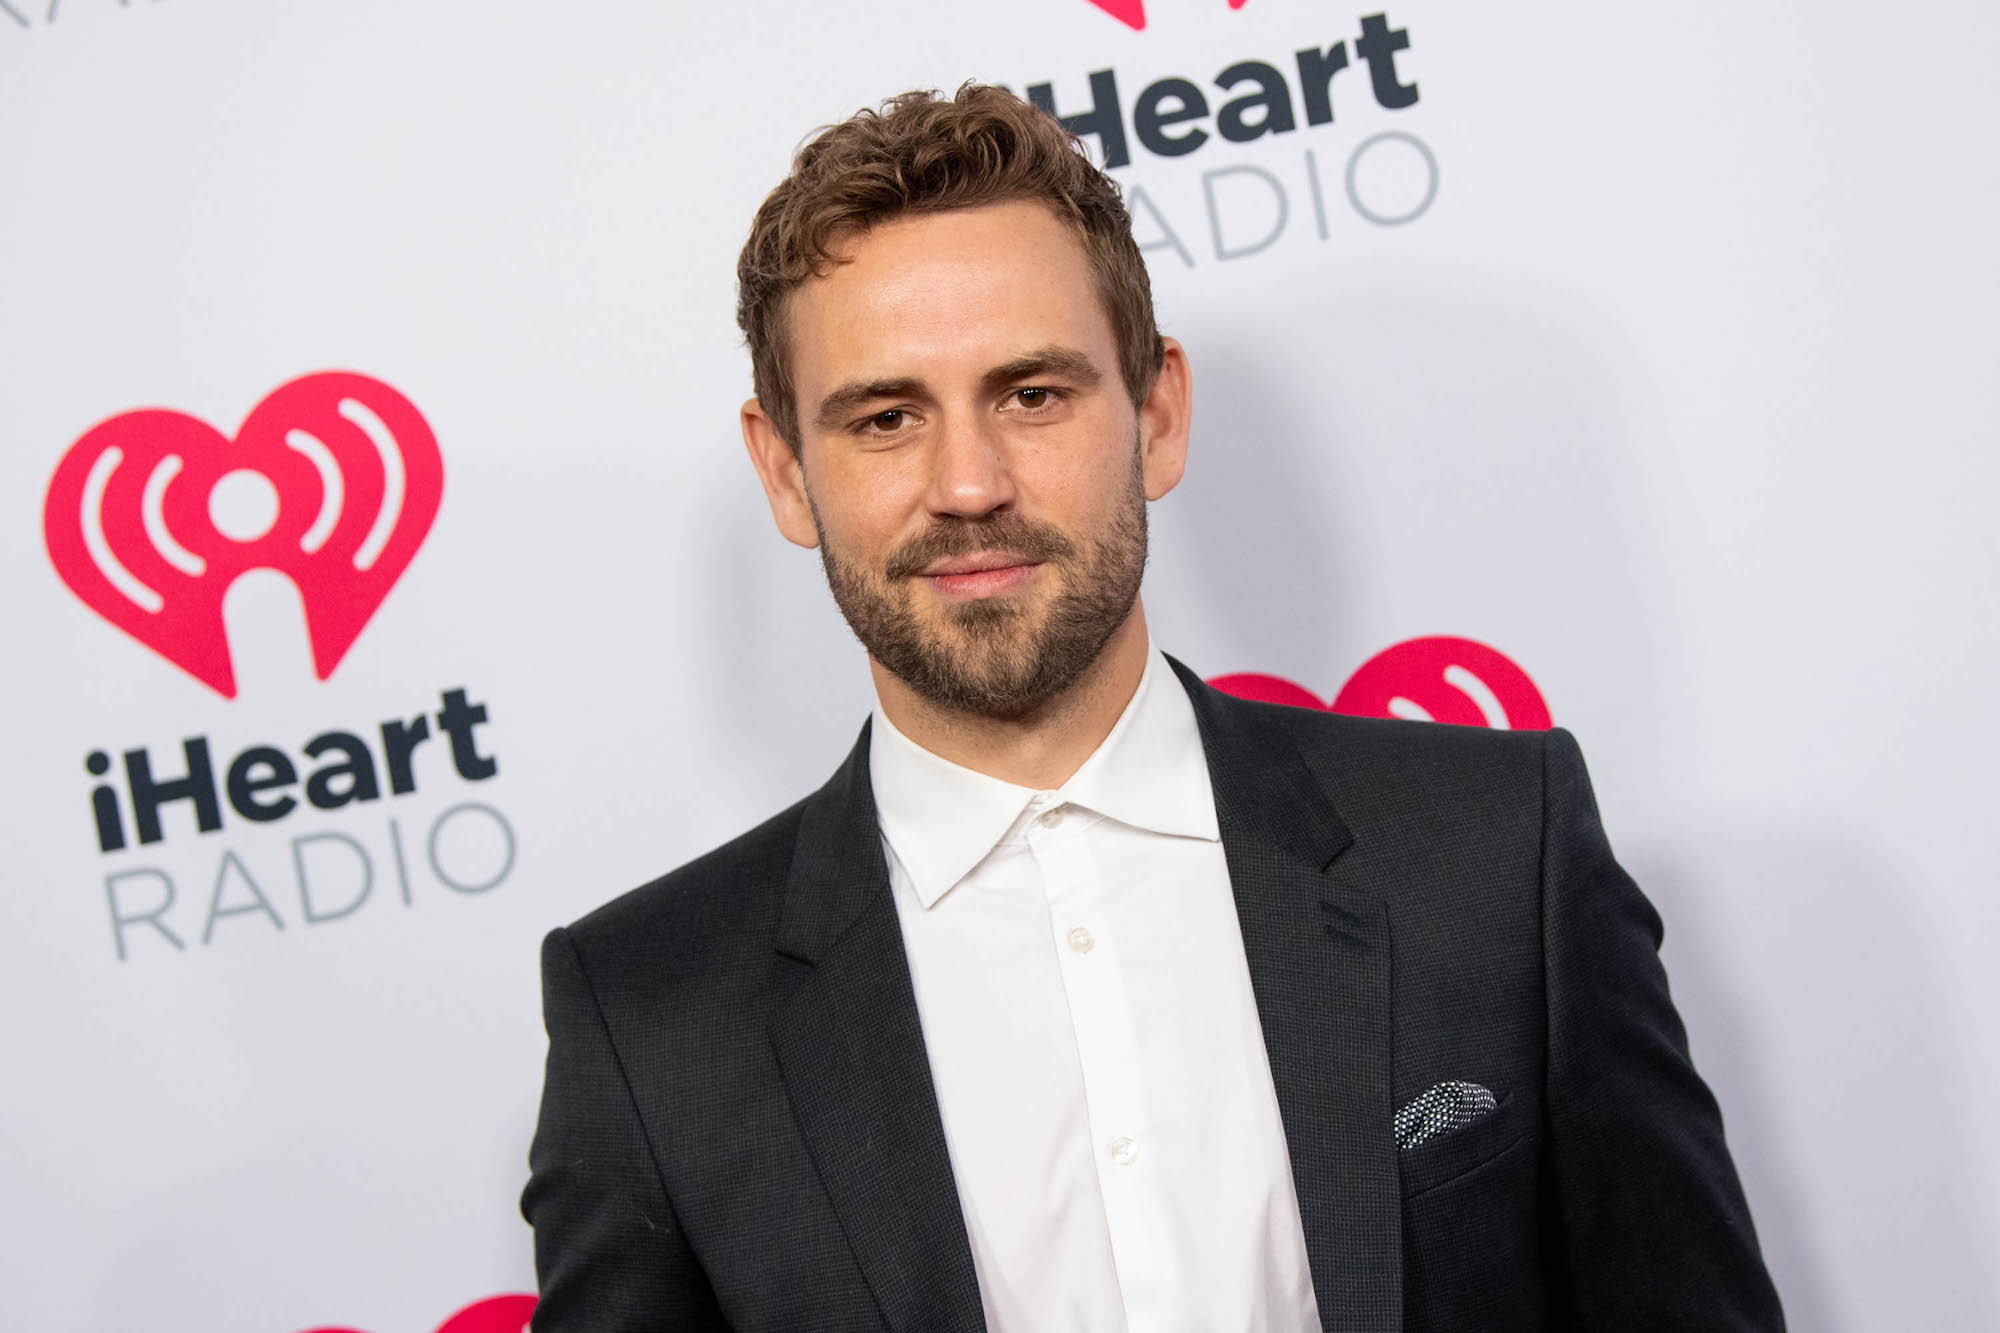 Nick Viall dressed in a black suit jacket and white shirt while attending the 2020 iHeartRadio Podcast Awards.